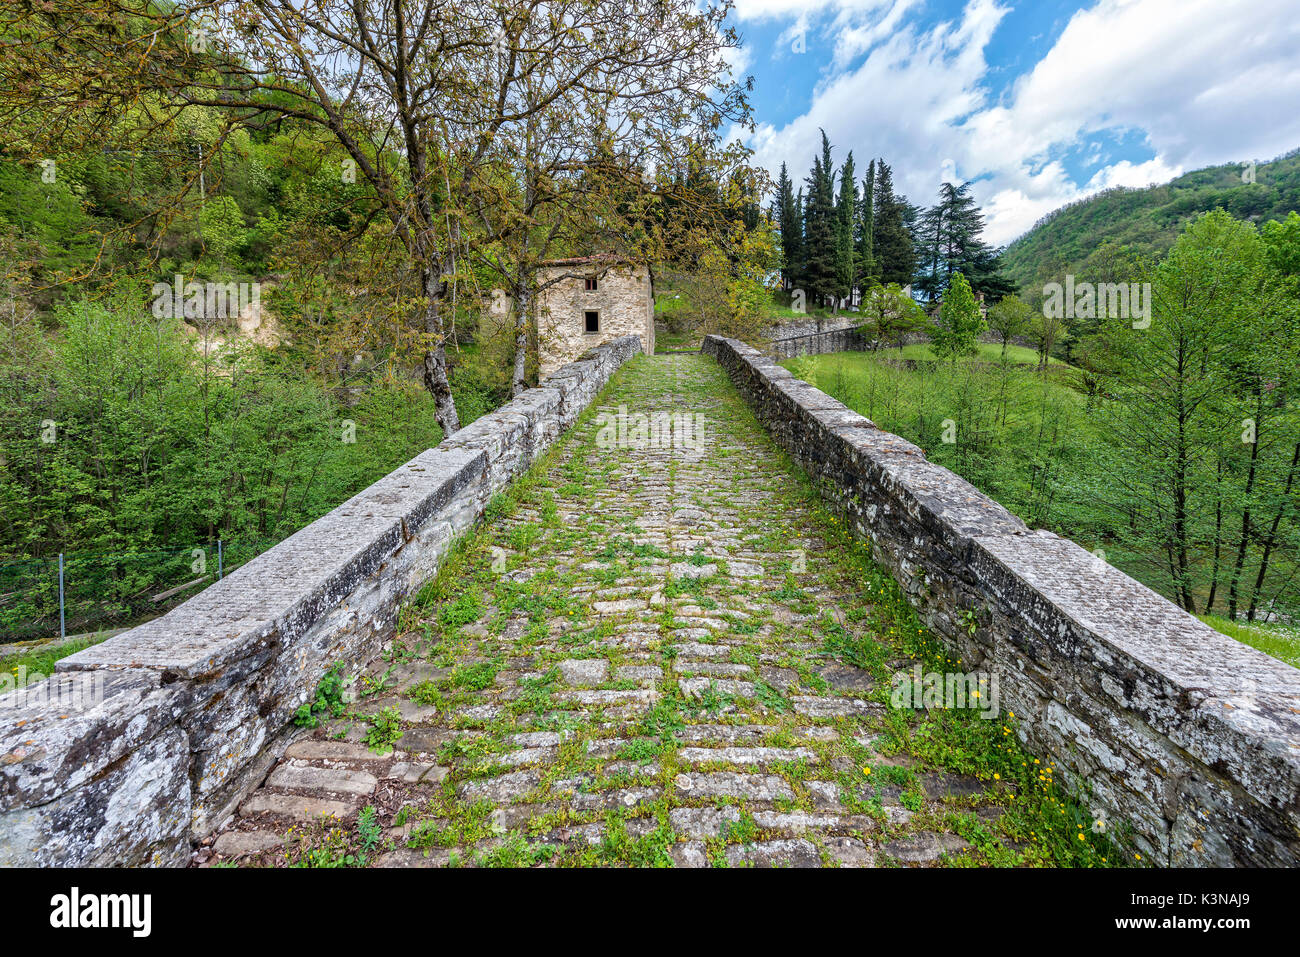 Old bridge and house in a sunny day, Campigna, Casentinesi forests, Emilia-Romagna, Italy Stock Photo